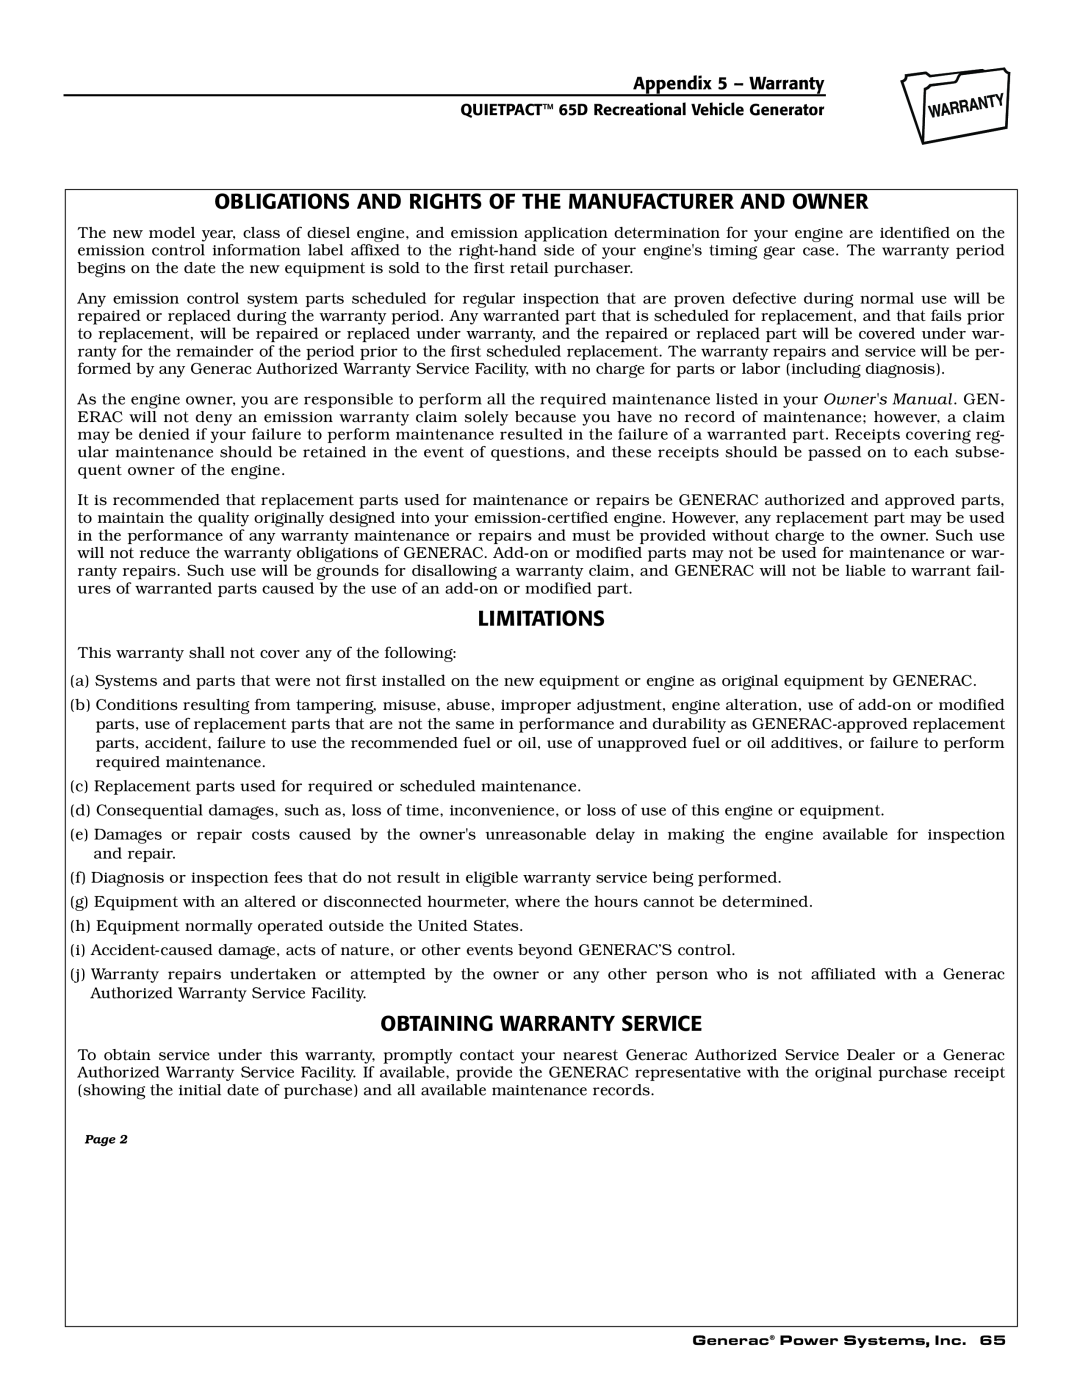 Generac 004614-1 owner manual Obligations And Rights Of The Manufacturer And Owner, Limitations, Obtaining Warranty Service 